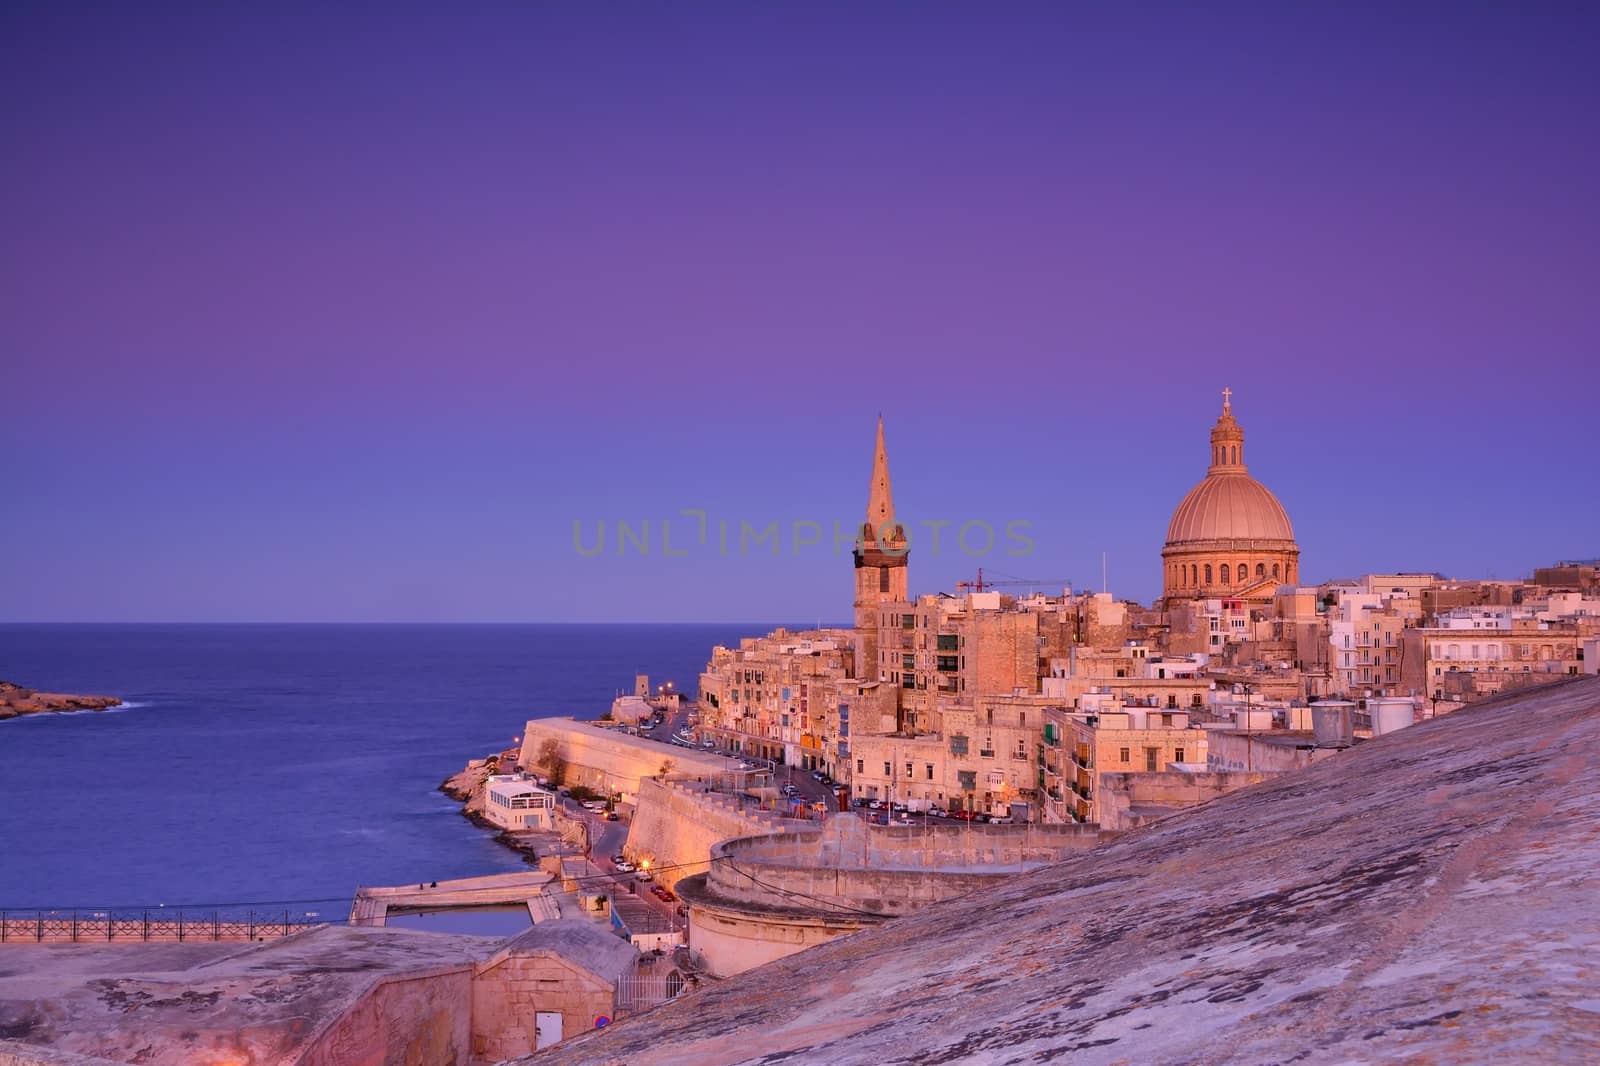 Church of Our Lady of Mount Carmel and St. Paul's Cathedral in Valletta, Malta. by CreativePhotoSpain